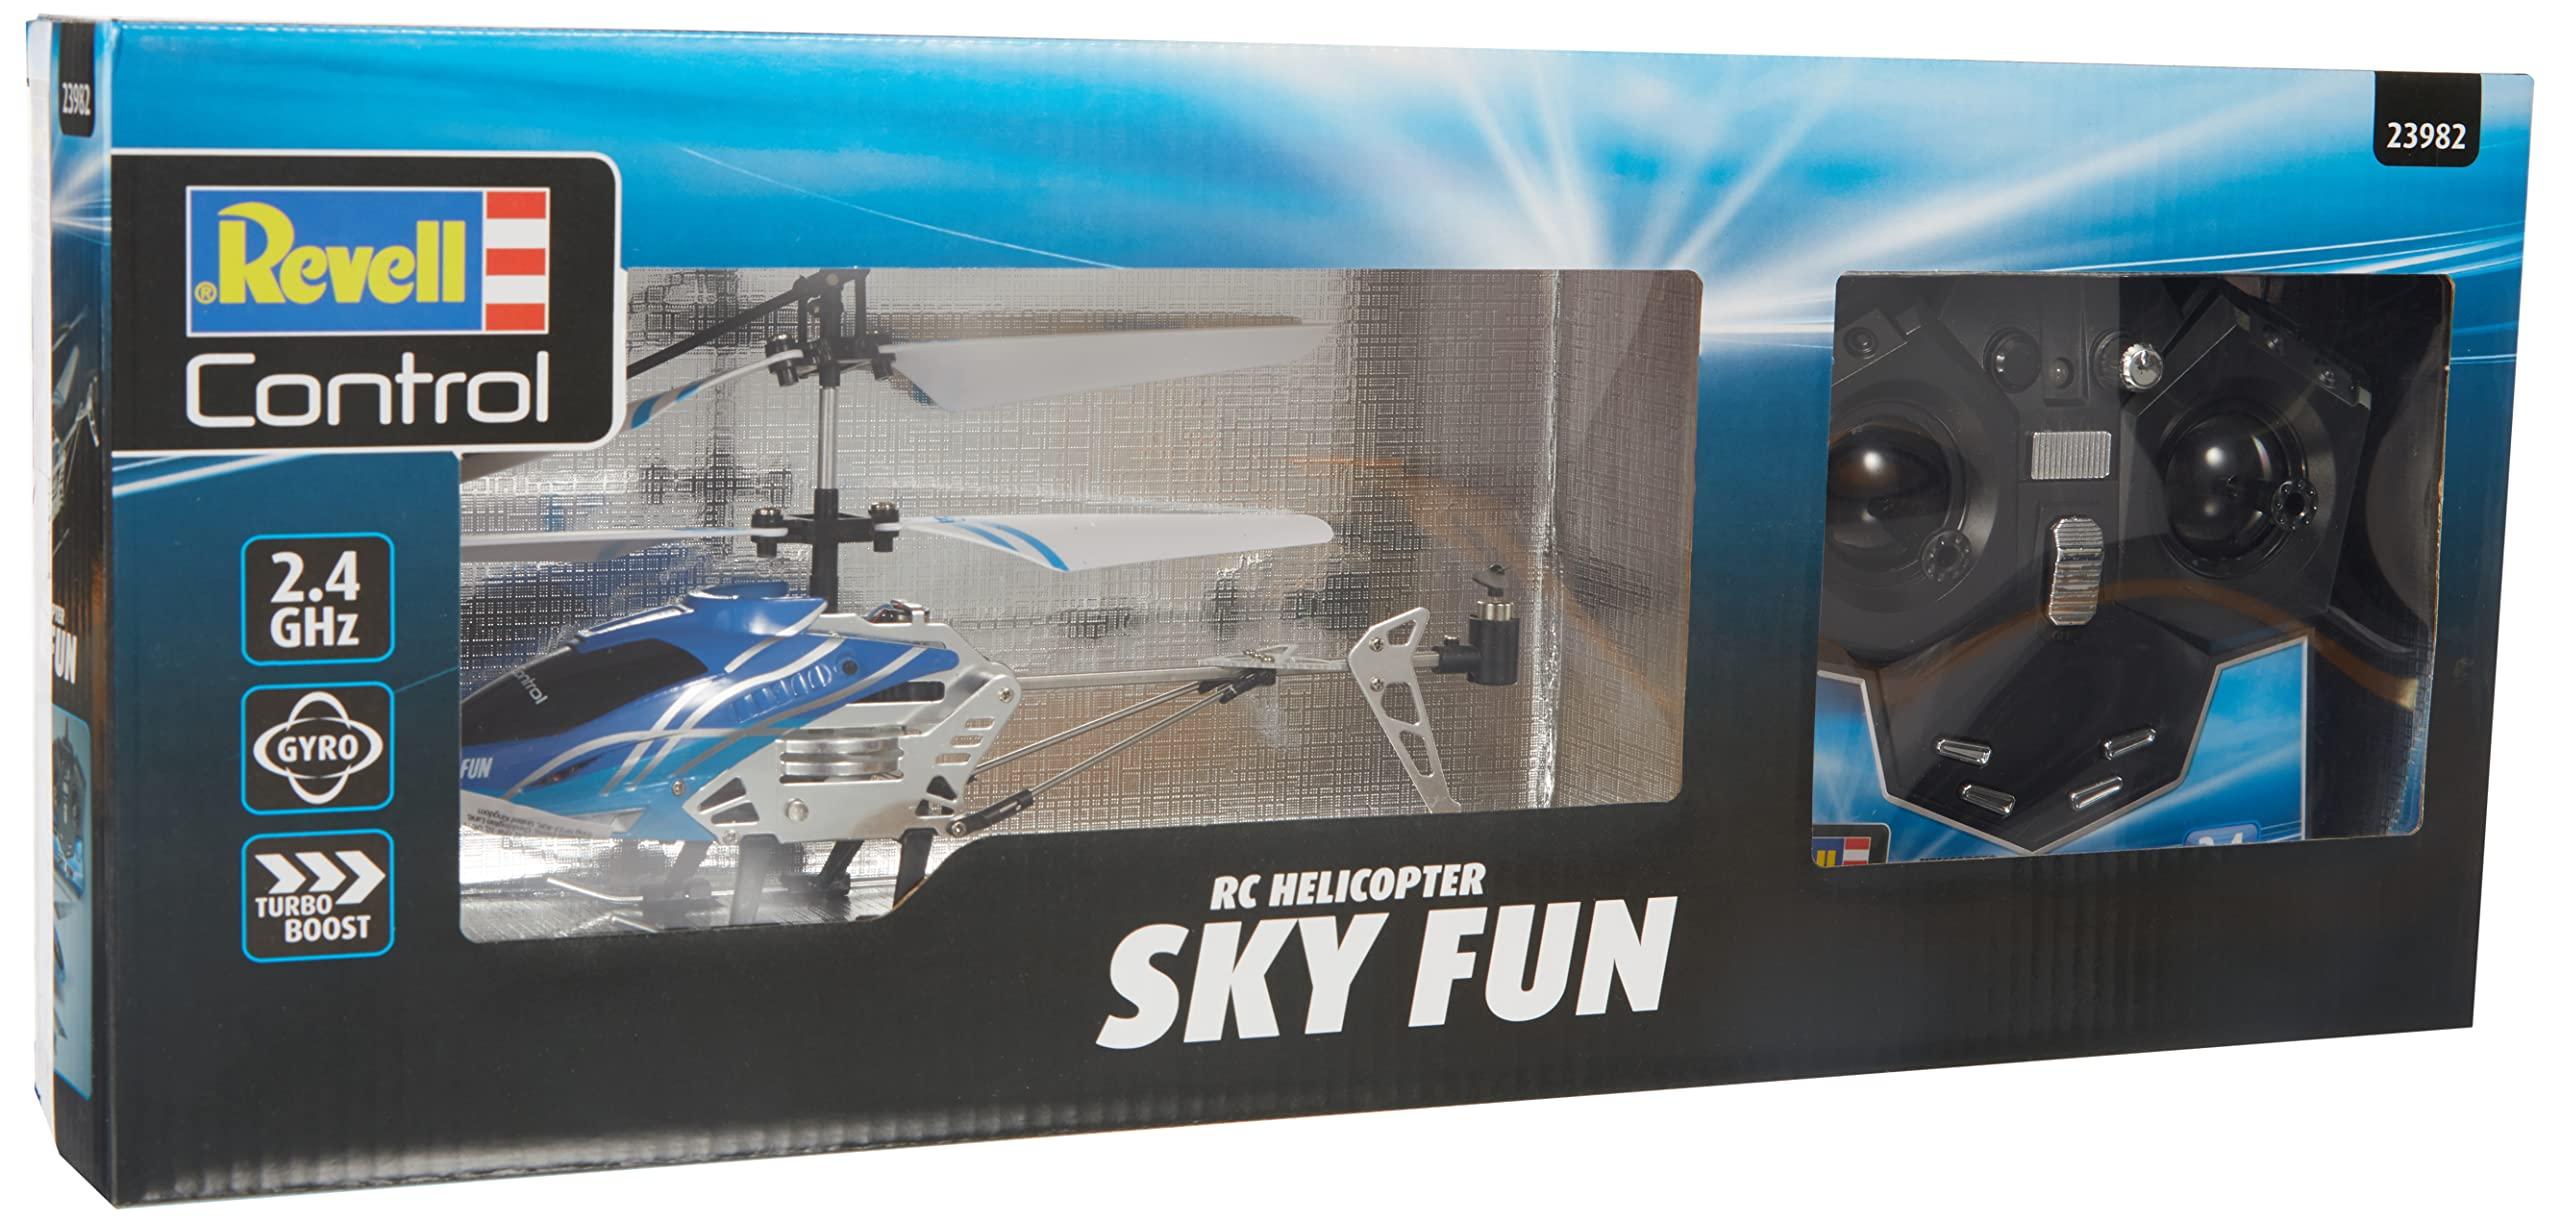 Sky Fun Helicopter:  Experience the ultimate in remote-controlled flying with Sky Fun Helicopter.